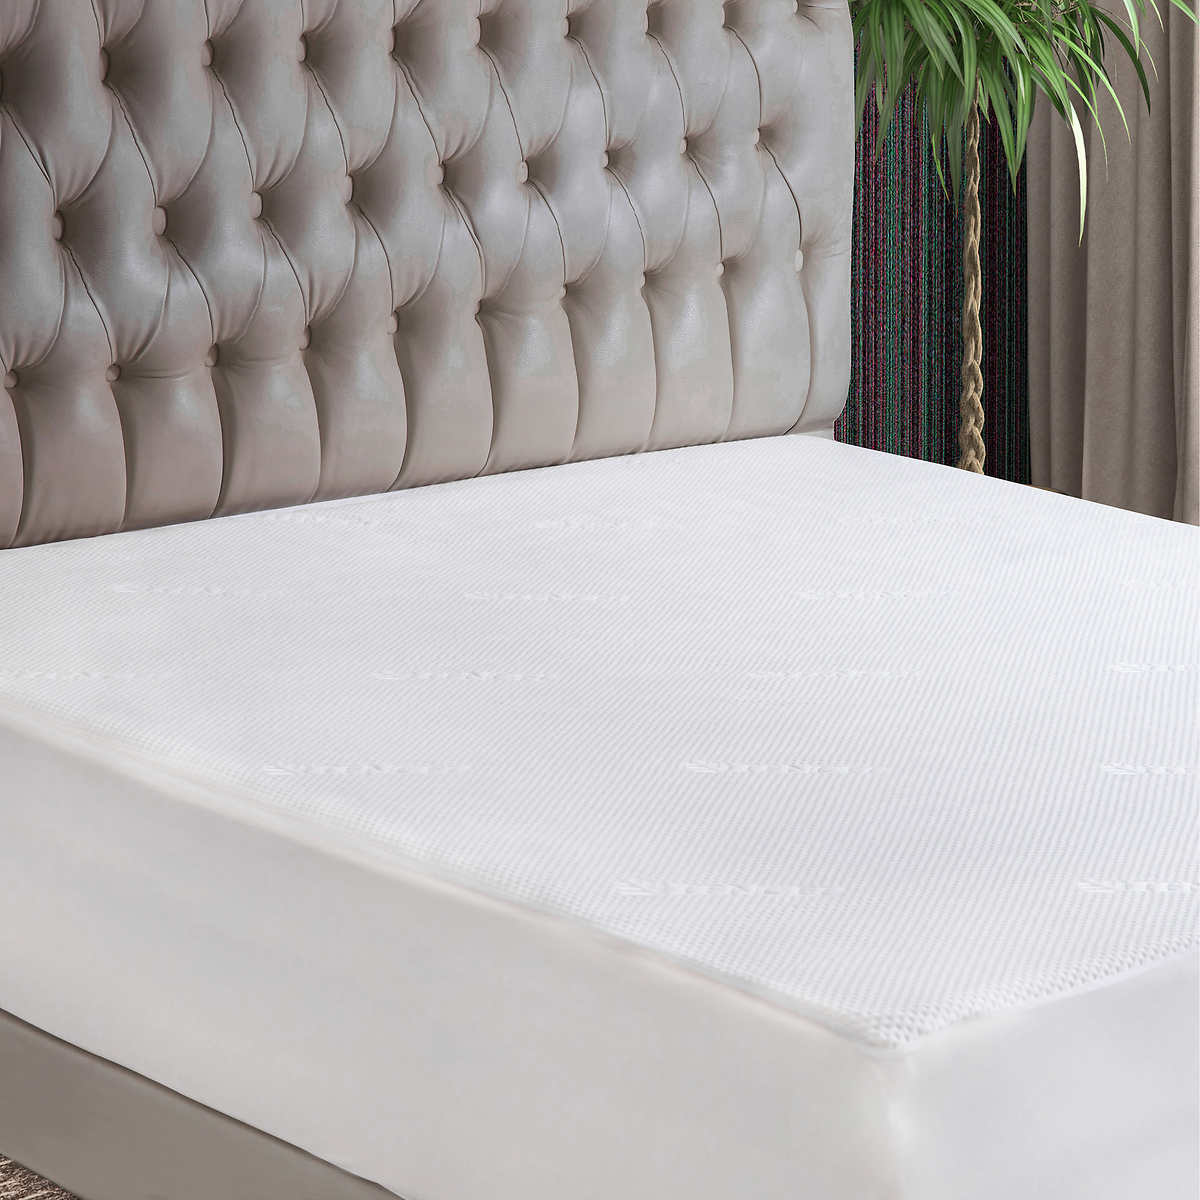 Fast for sale online AllerEase Cooling Mattress Pad Full Size Bed 54in X 75in 